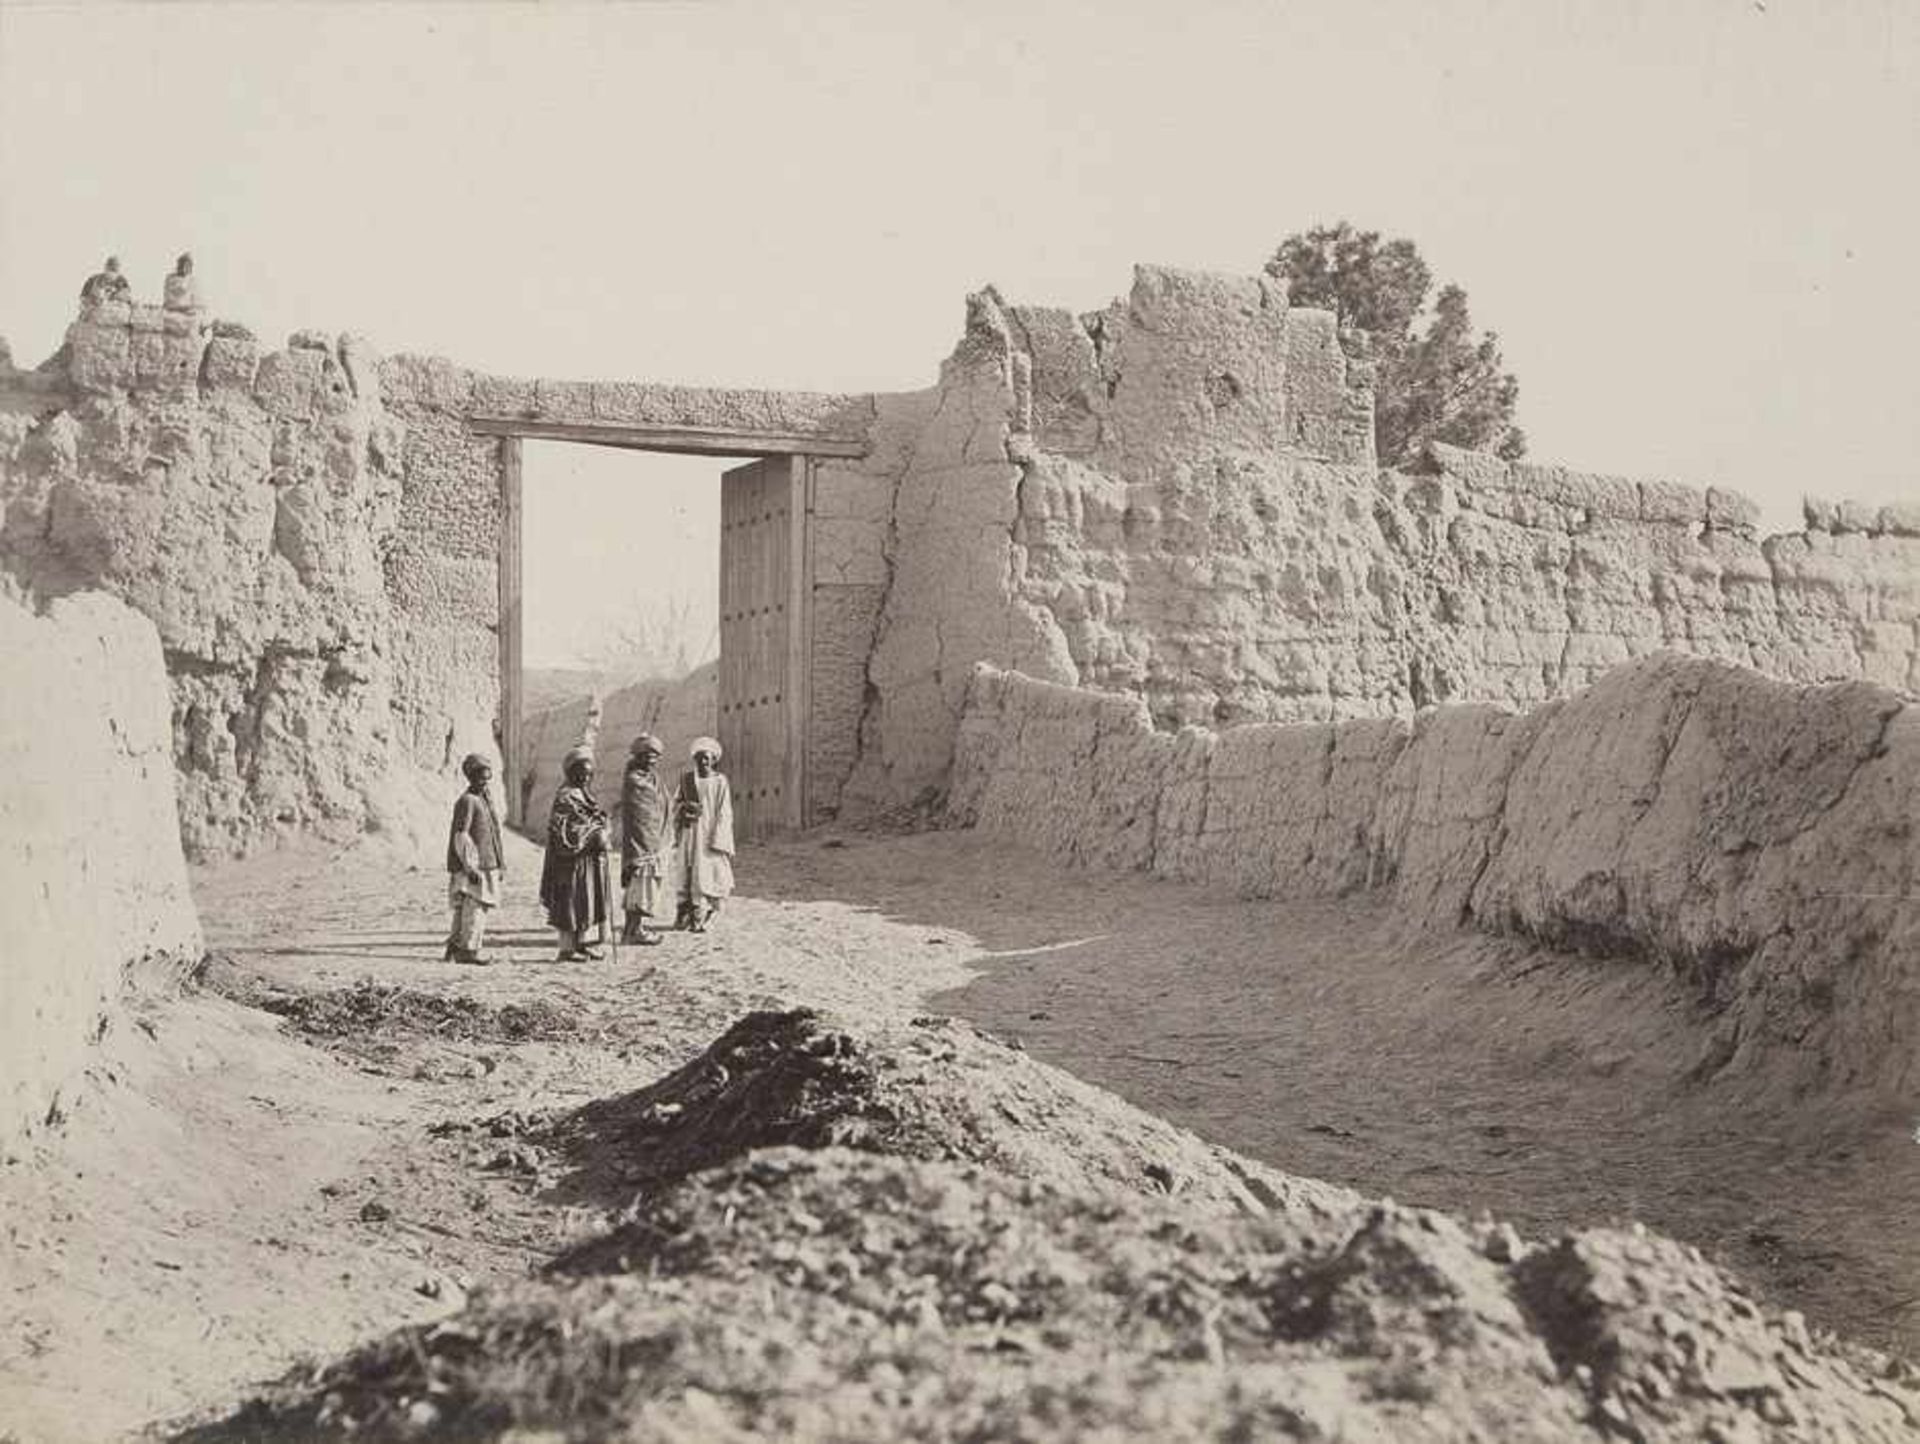 Burke, John and William Baker: Images of Fort Jellalabad near Kabul (Attributed to). Images of